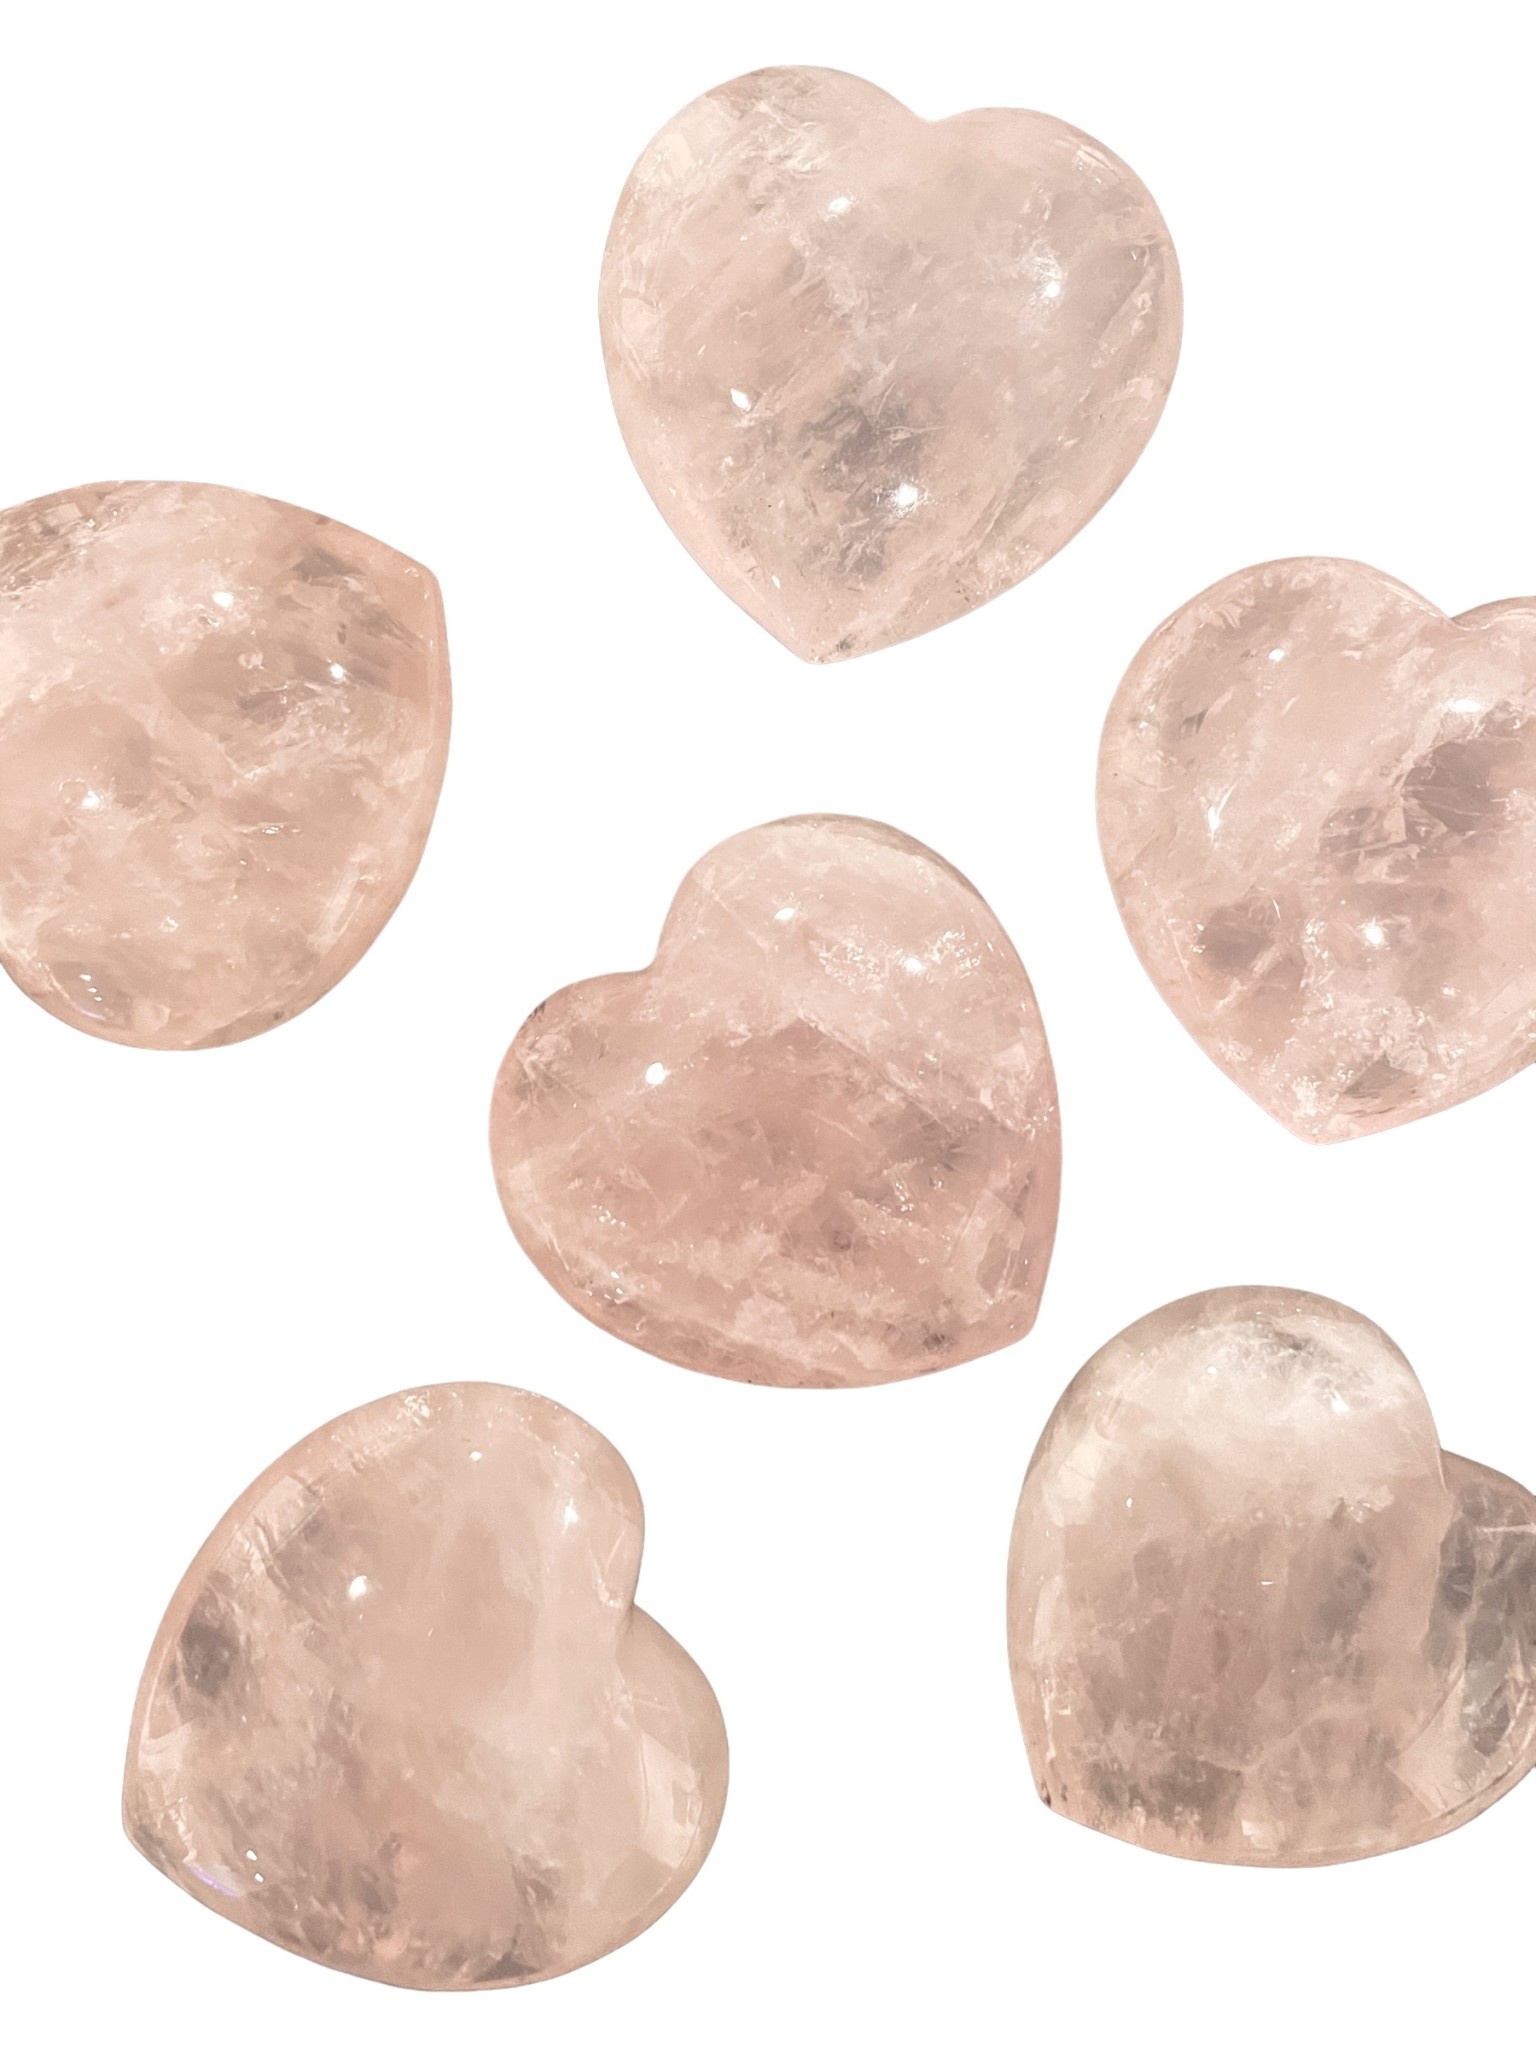 Hand Carved Rose Quartz Heart 6-8cm - Each Heart is individual and may vary from this image.-2